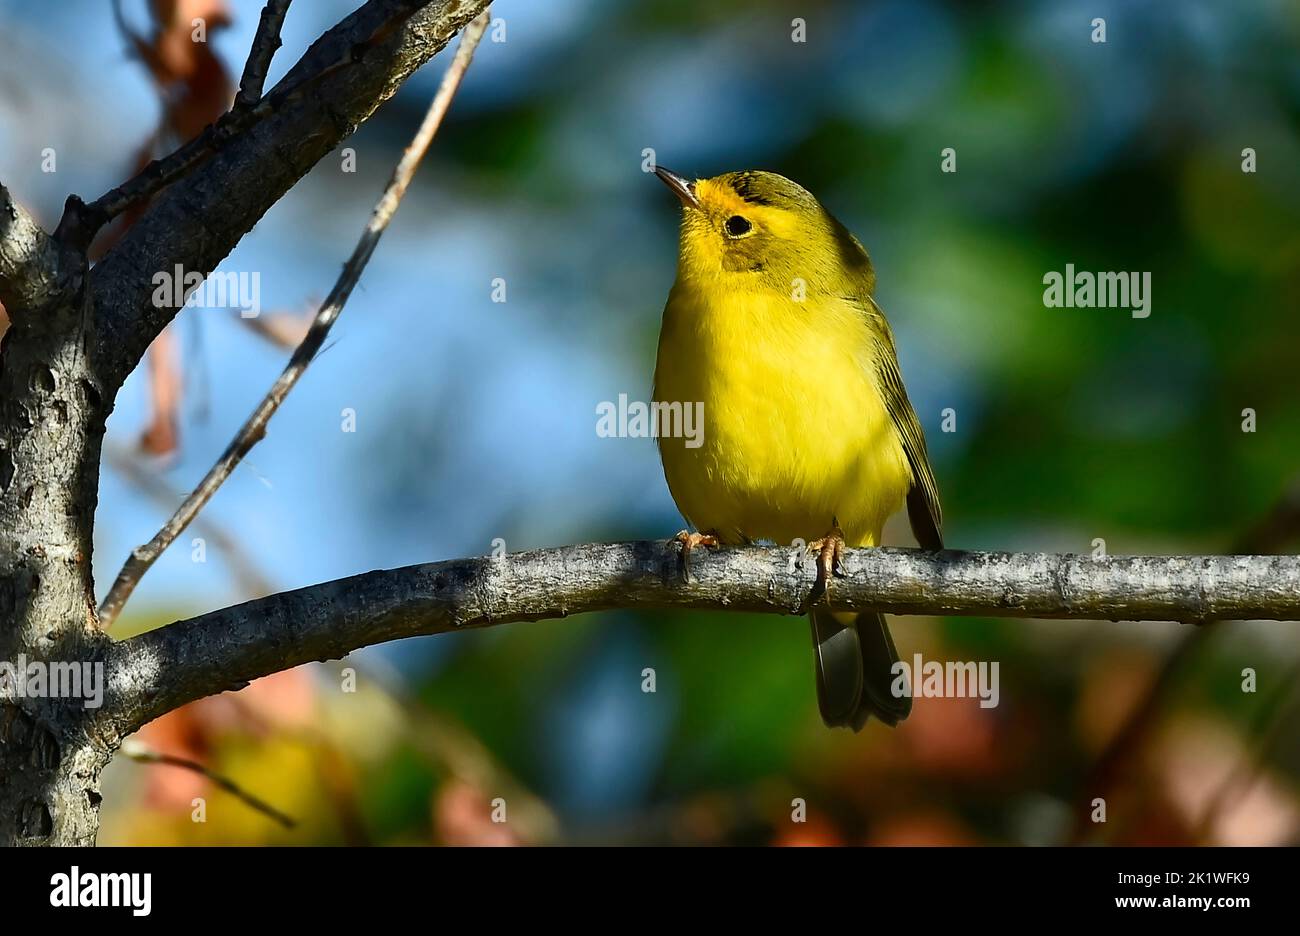 A Wilson's Warbler 'Wilsonia pusilla', perched on a tree branch in rural Alberta Canada. Stock Photo